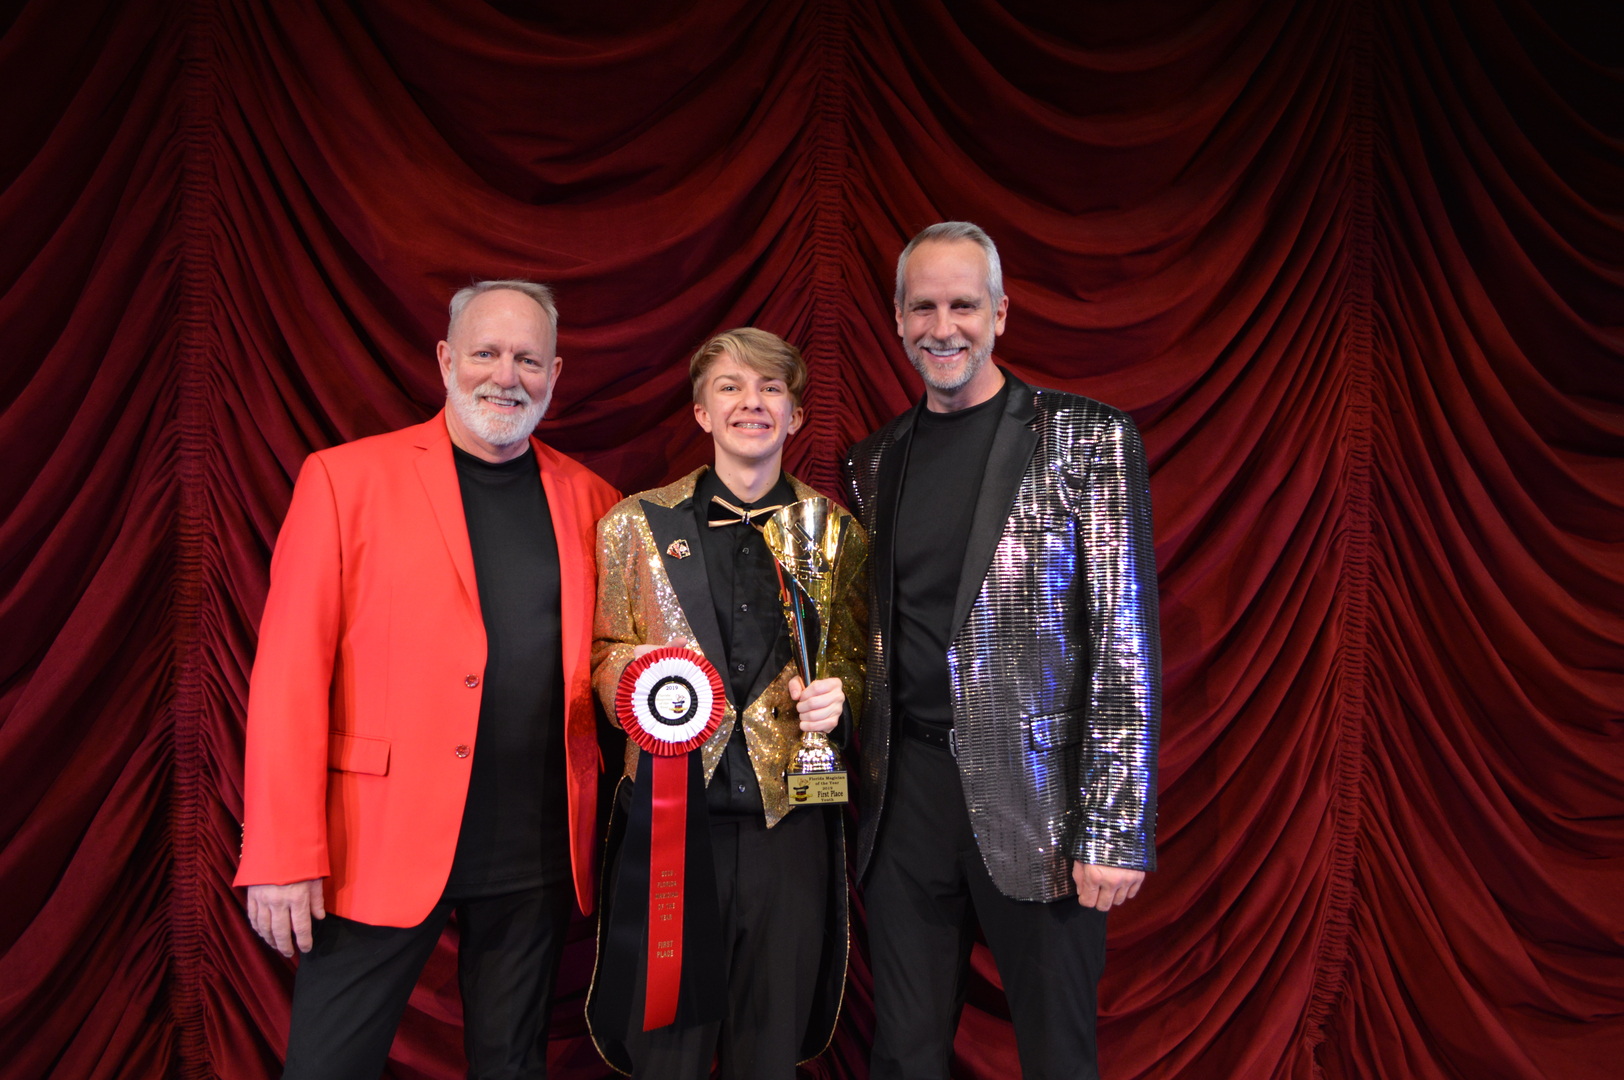 Three people posing for a picture in front of a red curtain.